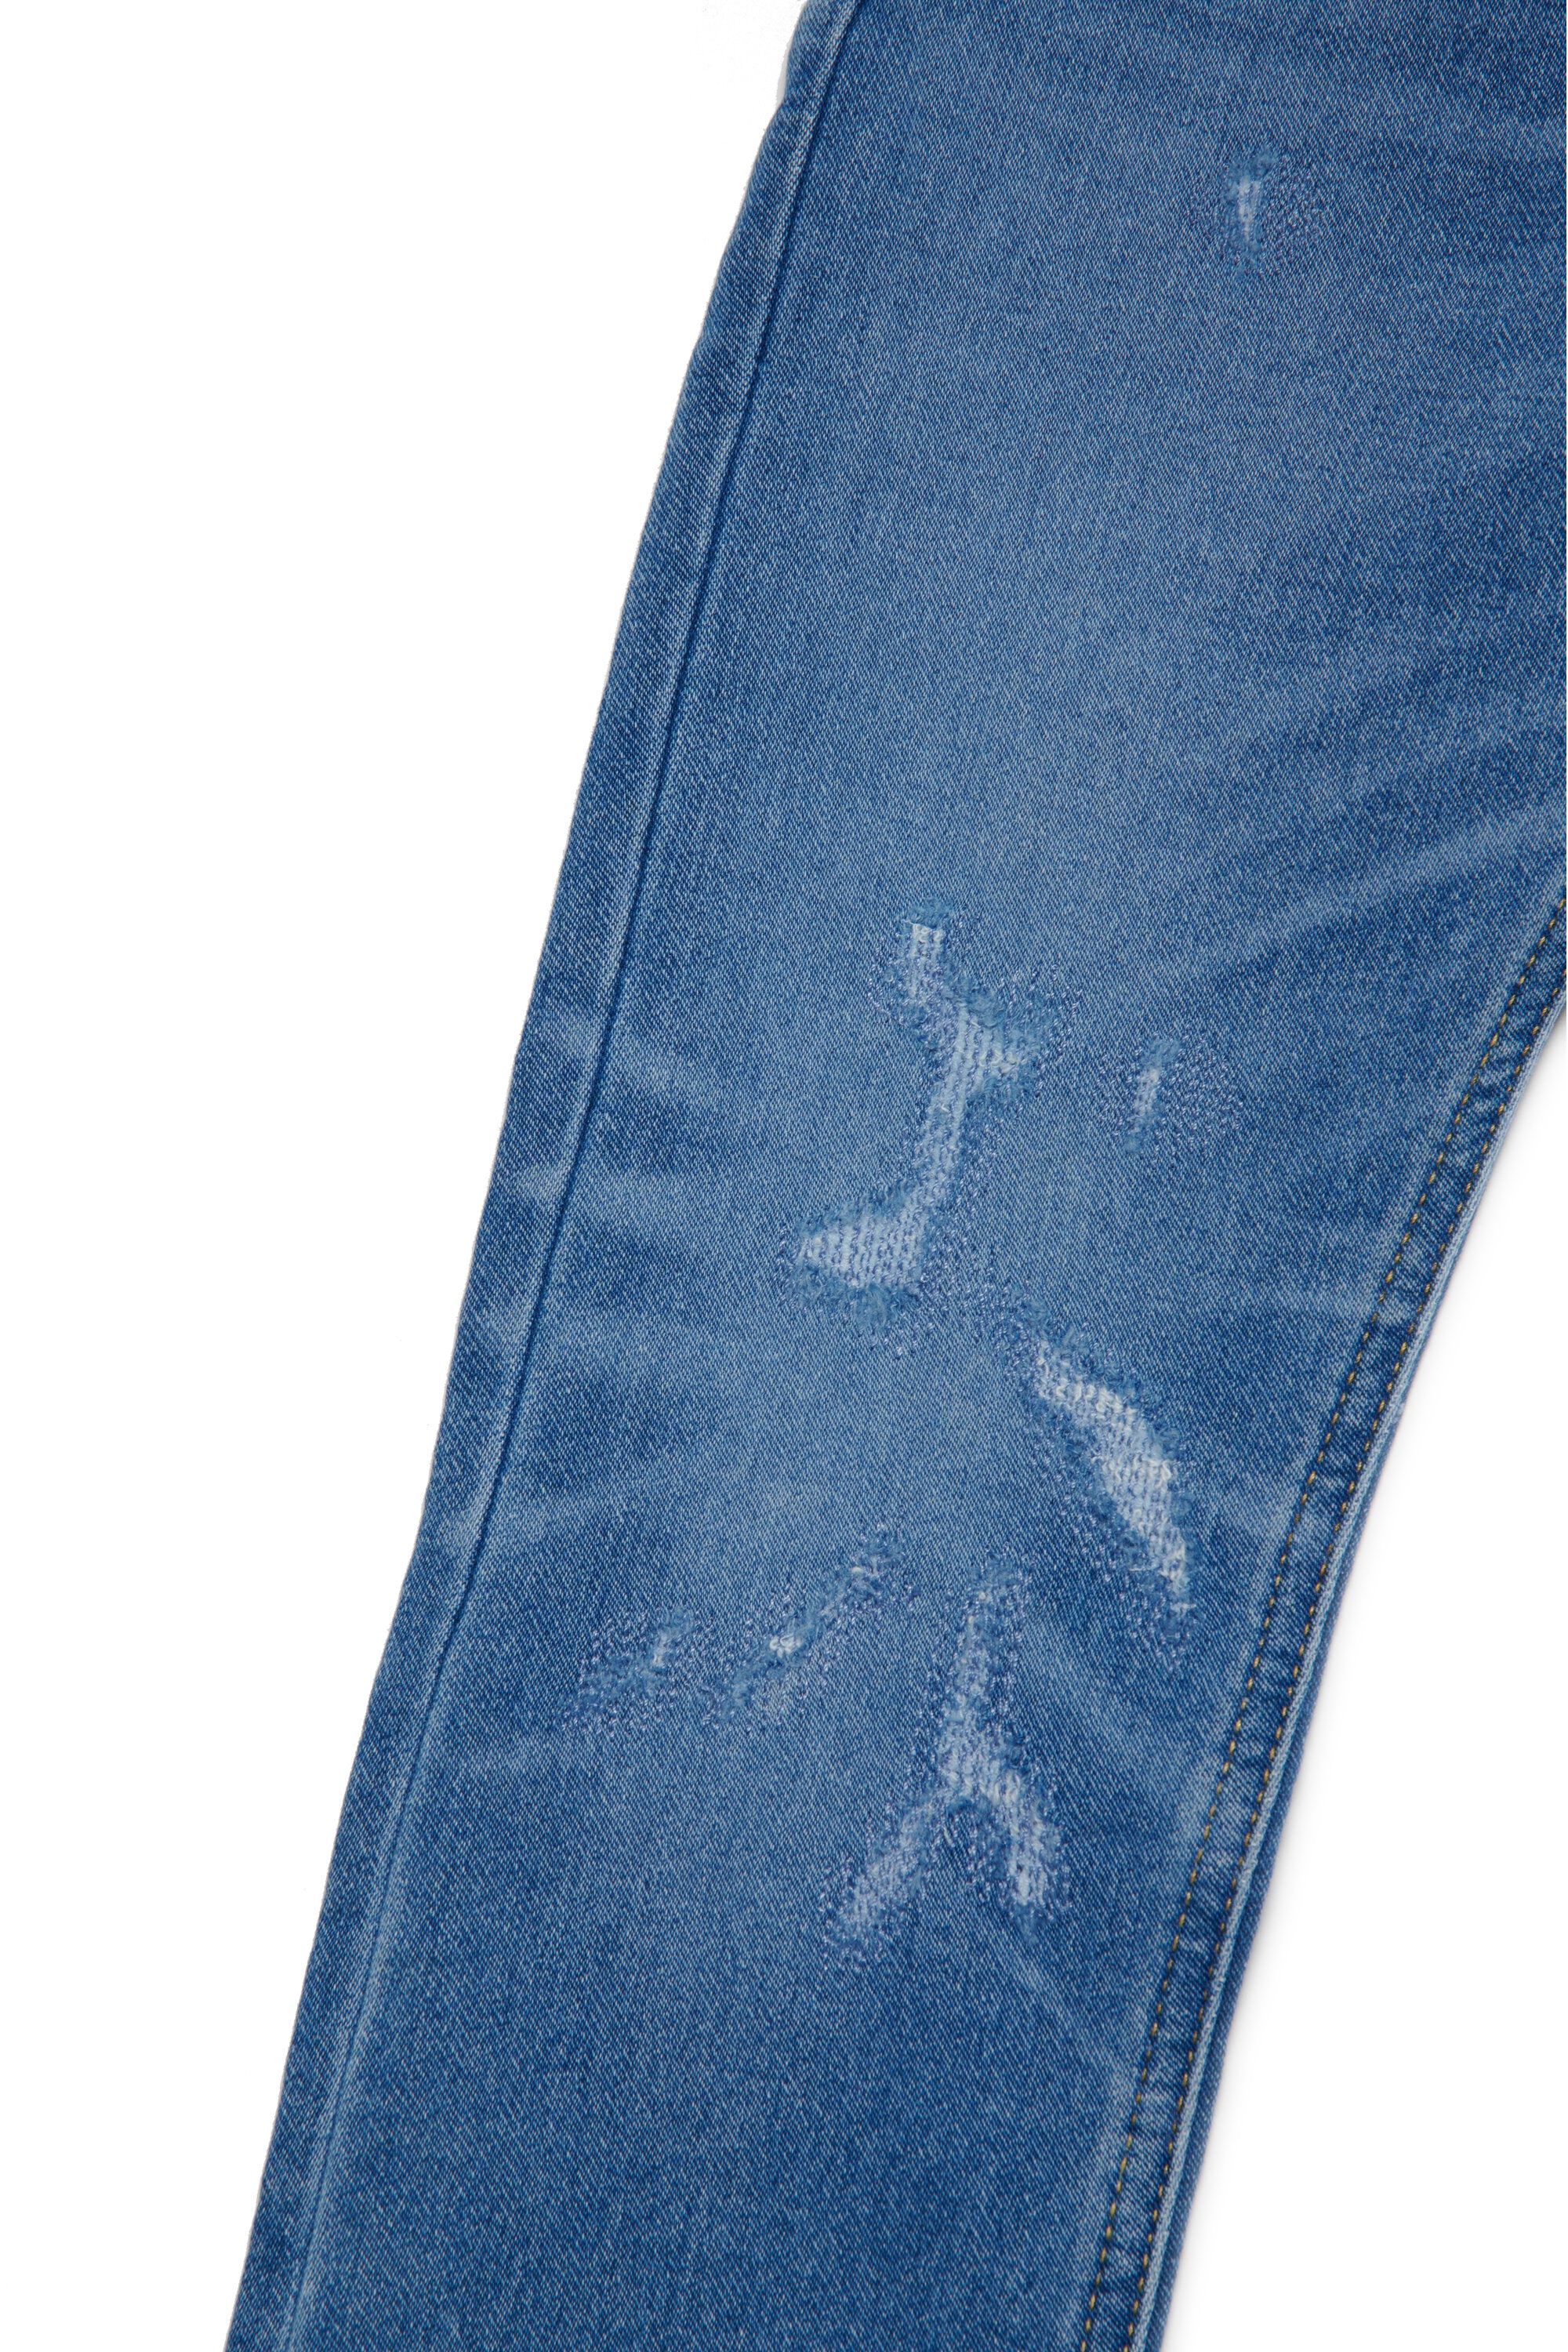 Blue tapered JoggJeans® with breaks - Krooley